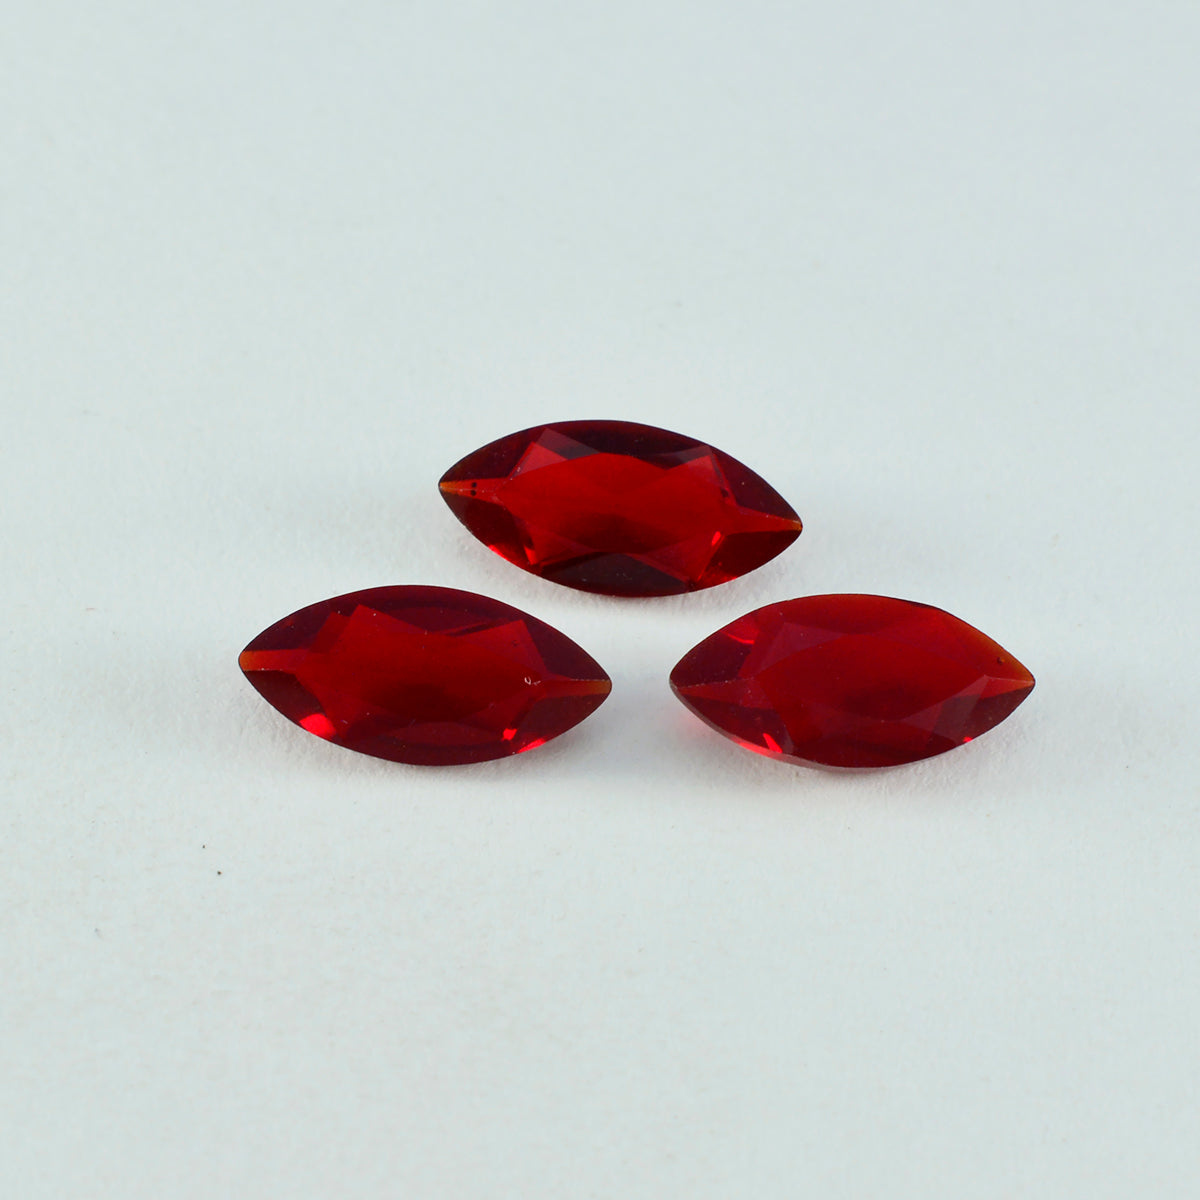 Riyogems 1PC Red Ruby CZ Faceted 10x20 mm Marquise Shape good-looking Quality Loose Gems